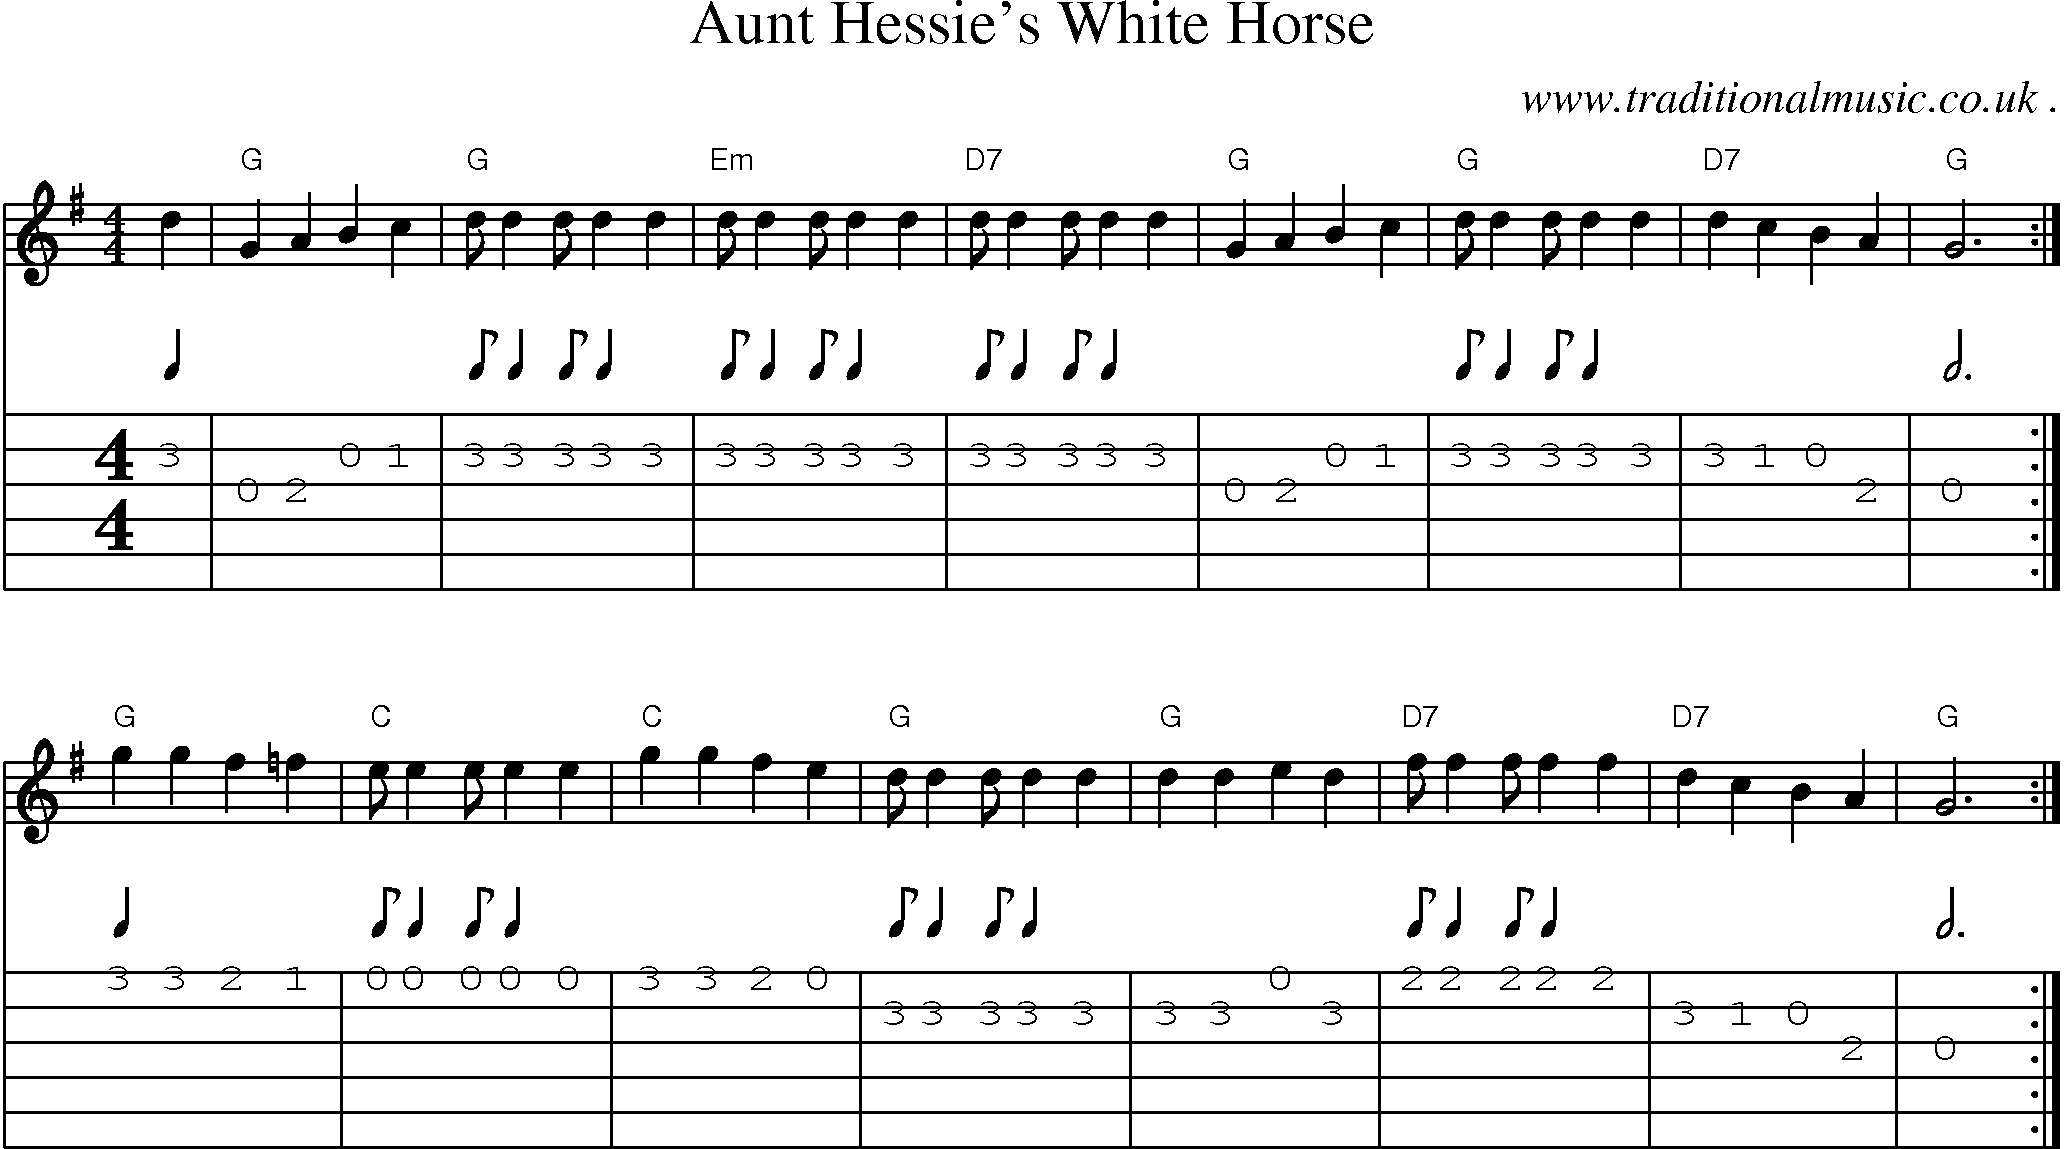 Sheet-Music and Guitar Tabs for Aunt Hessies White Horse